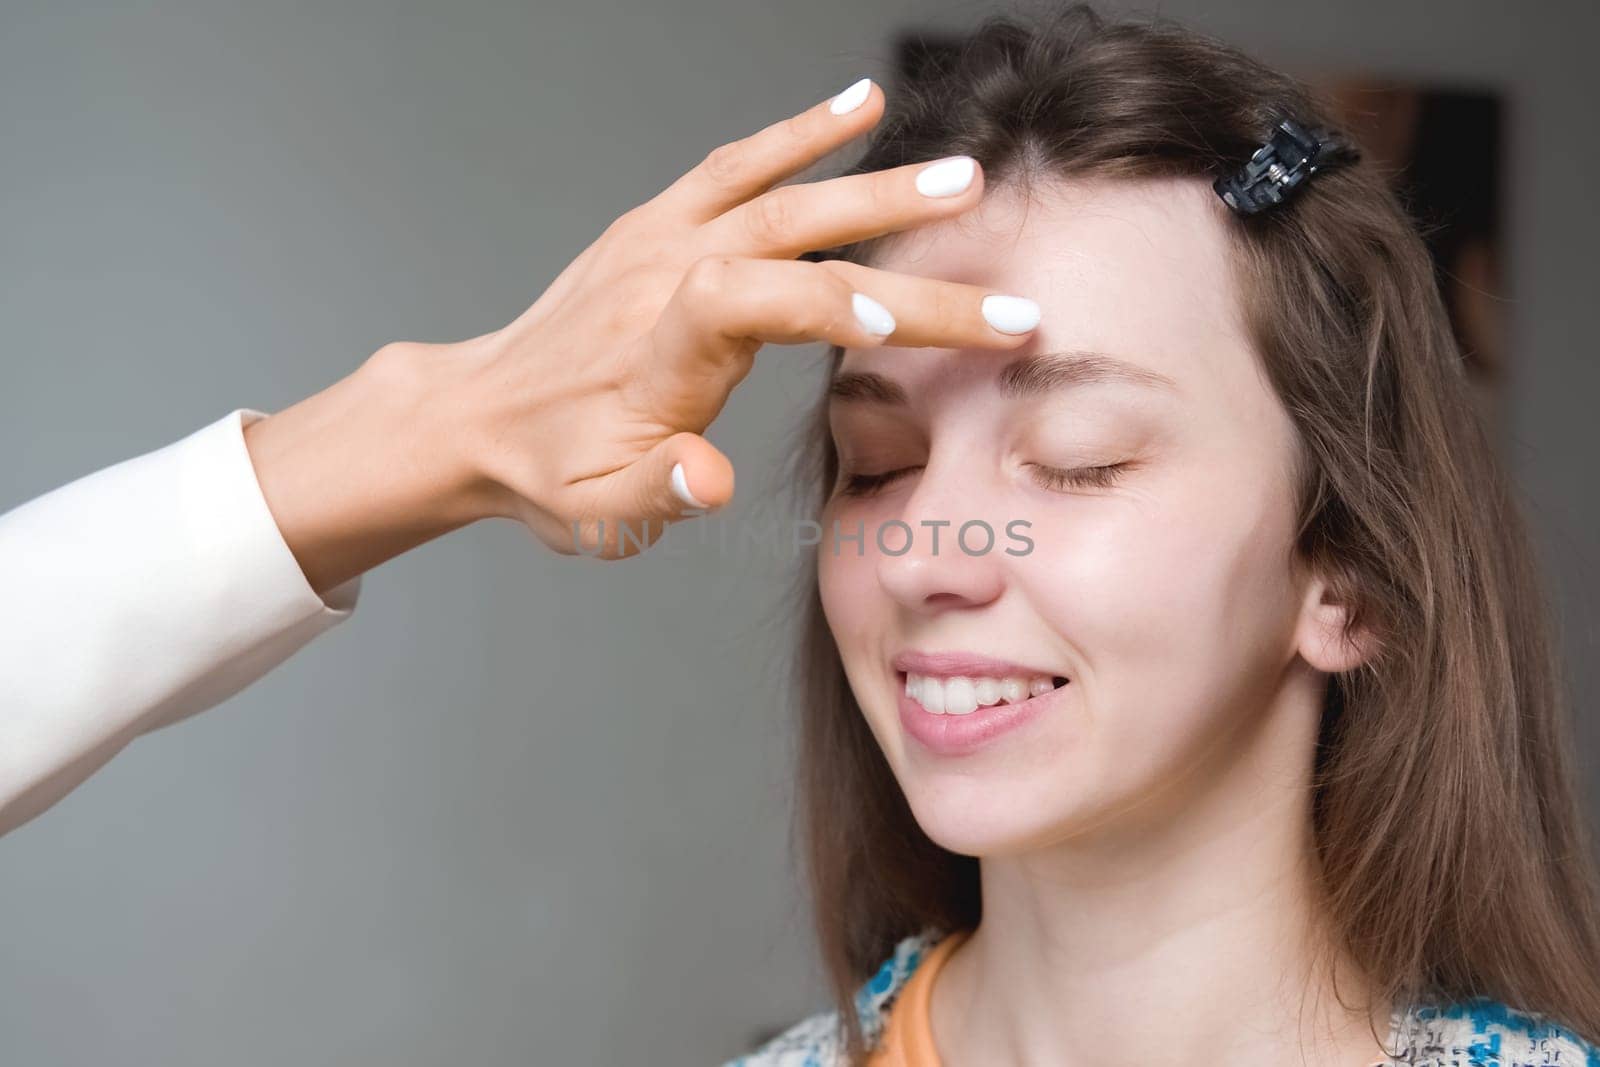 In a beauty salon, a master cosmetologist applies makeup and wipes eyebrows with a cotton pad. Close-up of the model's face during the procedure by yanik88